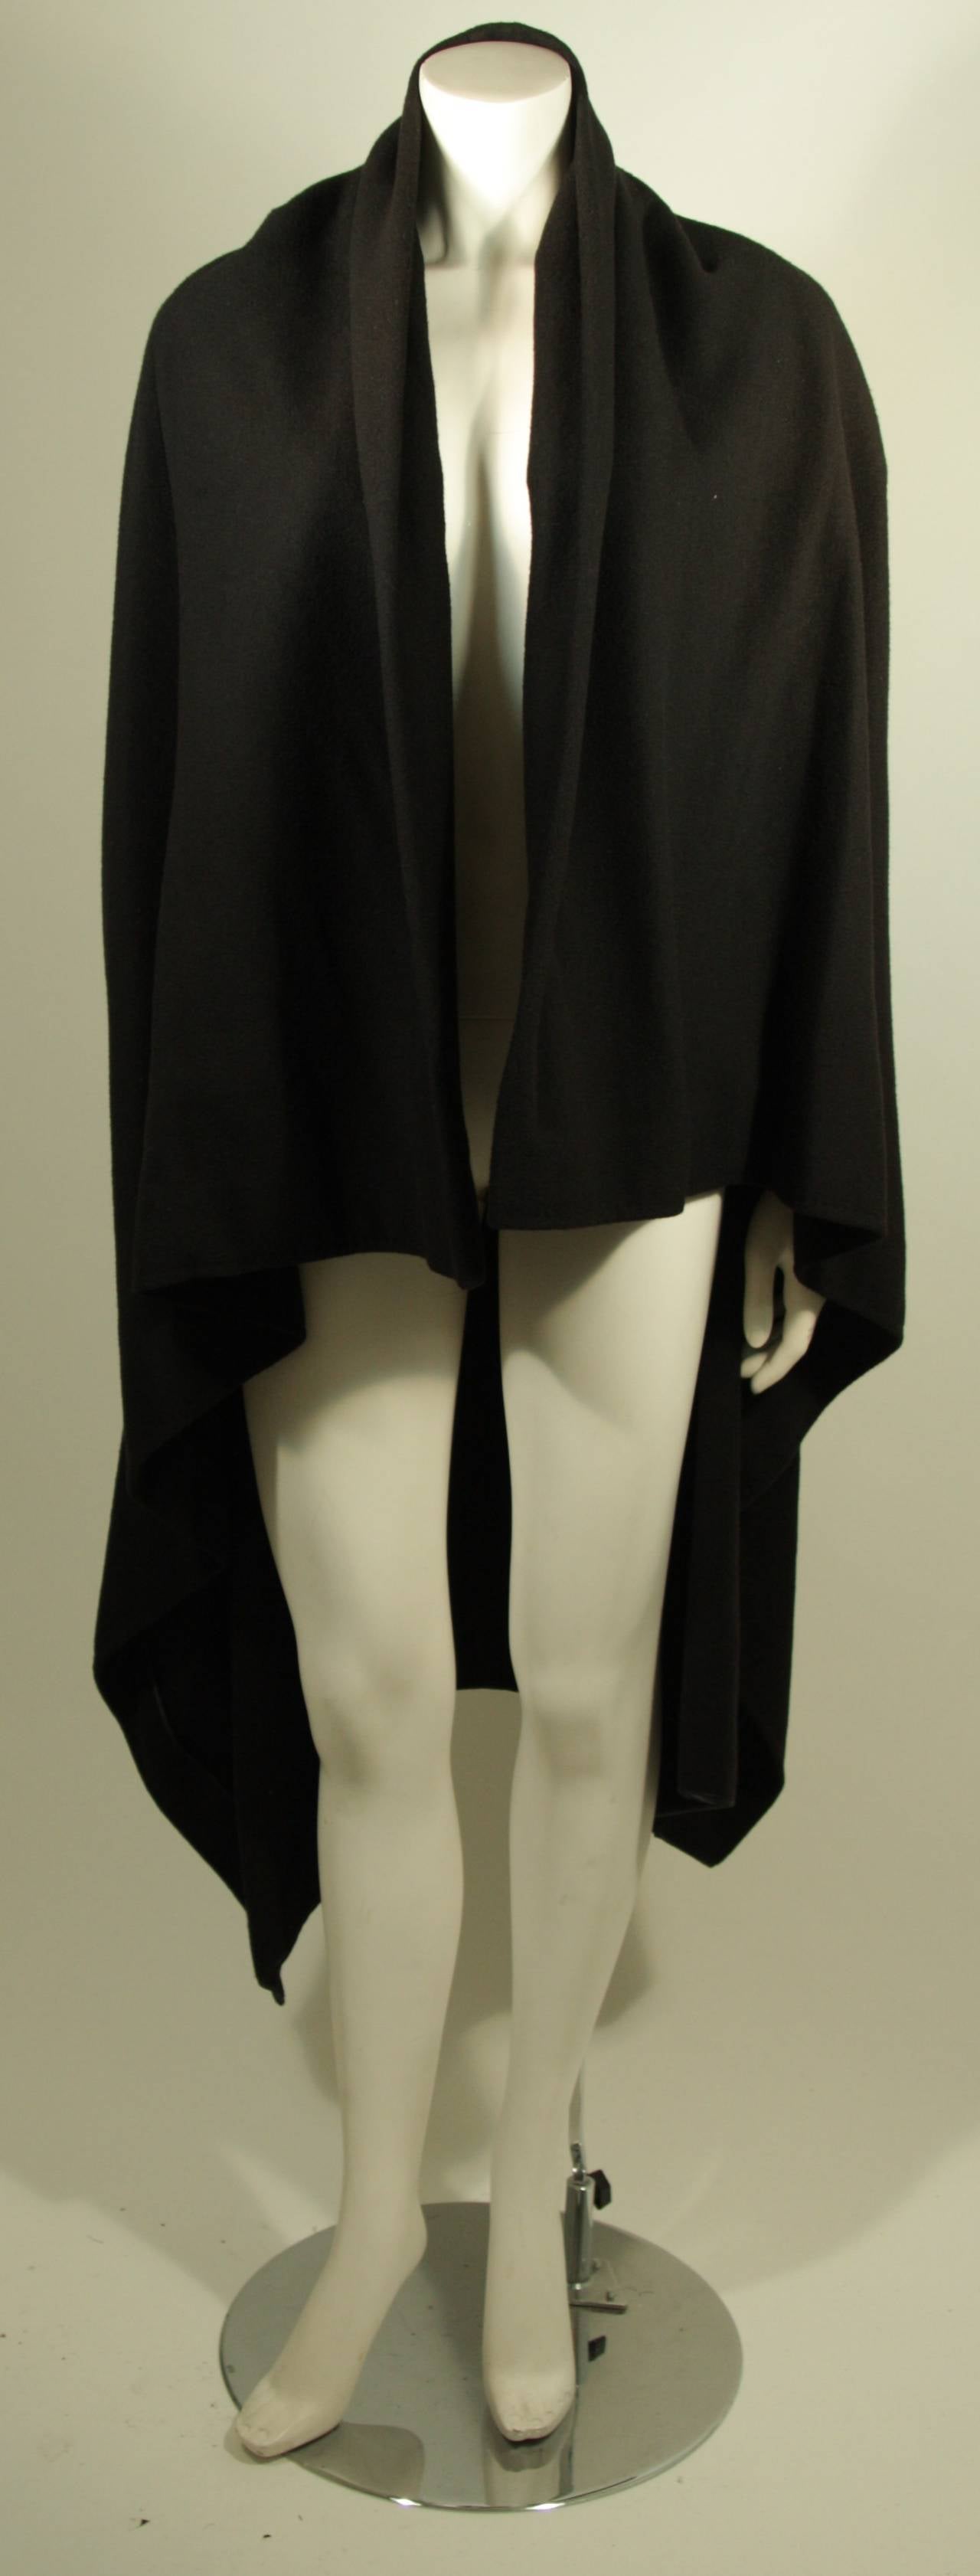 This Maison Martin Margiela original is available for viewing at our Beverly Hills Boutique. The cape style coat is composed of a black wool. It is a throw styl which can be wrapped and adorned with a brooch as a closure. Silk lining. There are very